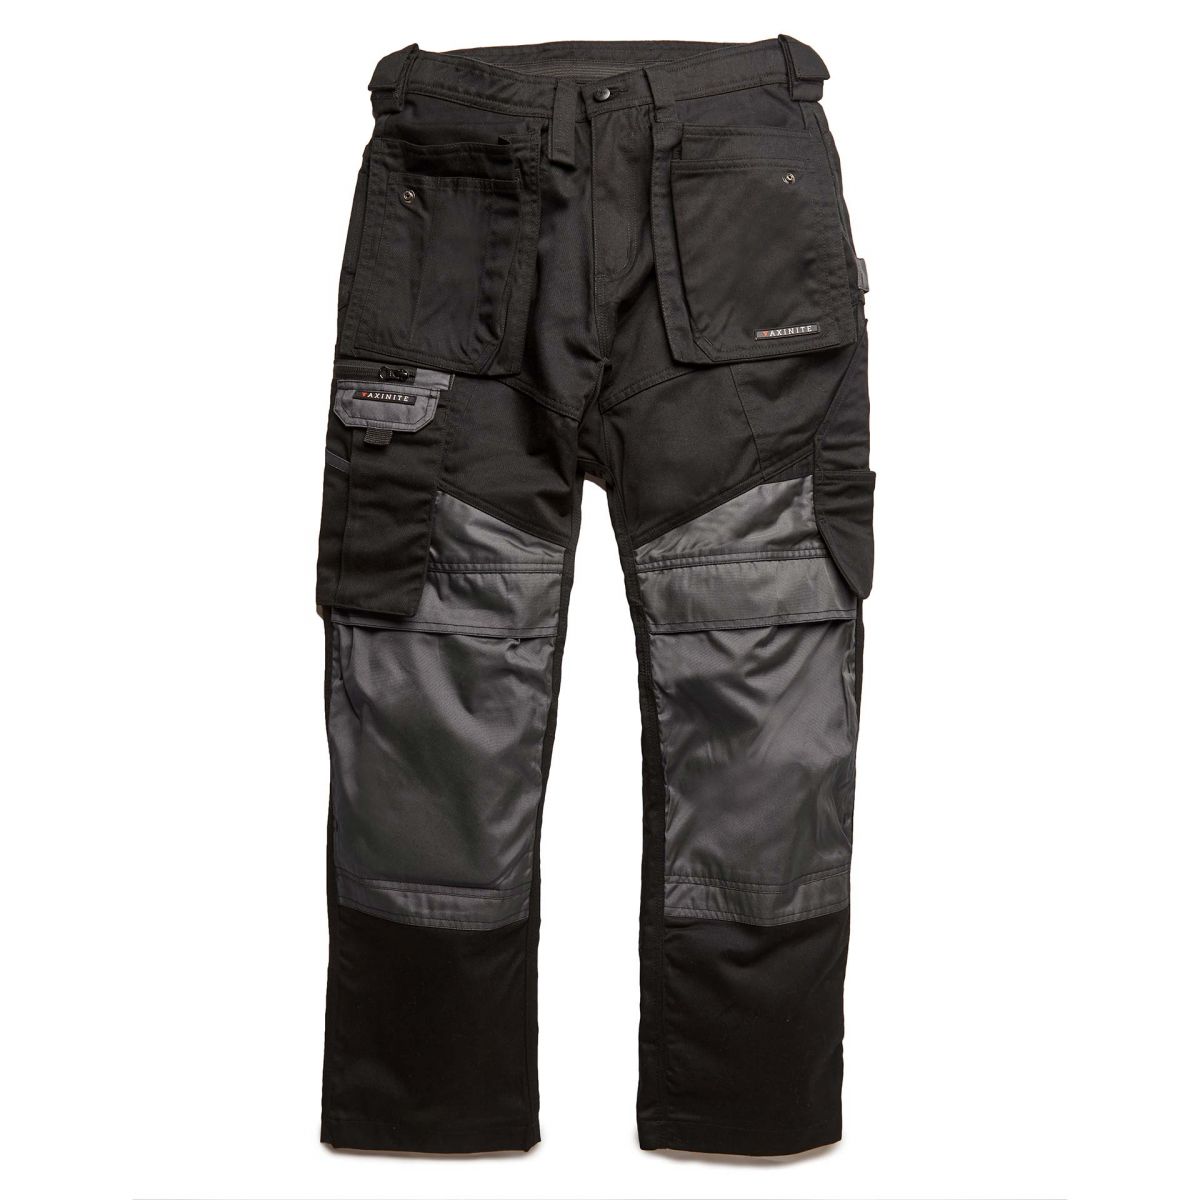 View Axinite AX39 Workwear Trousers Black 38R information